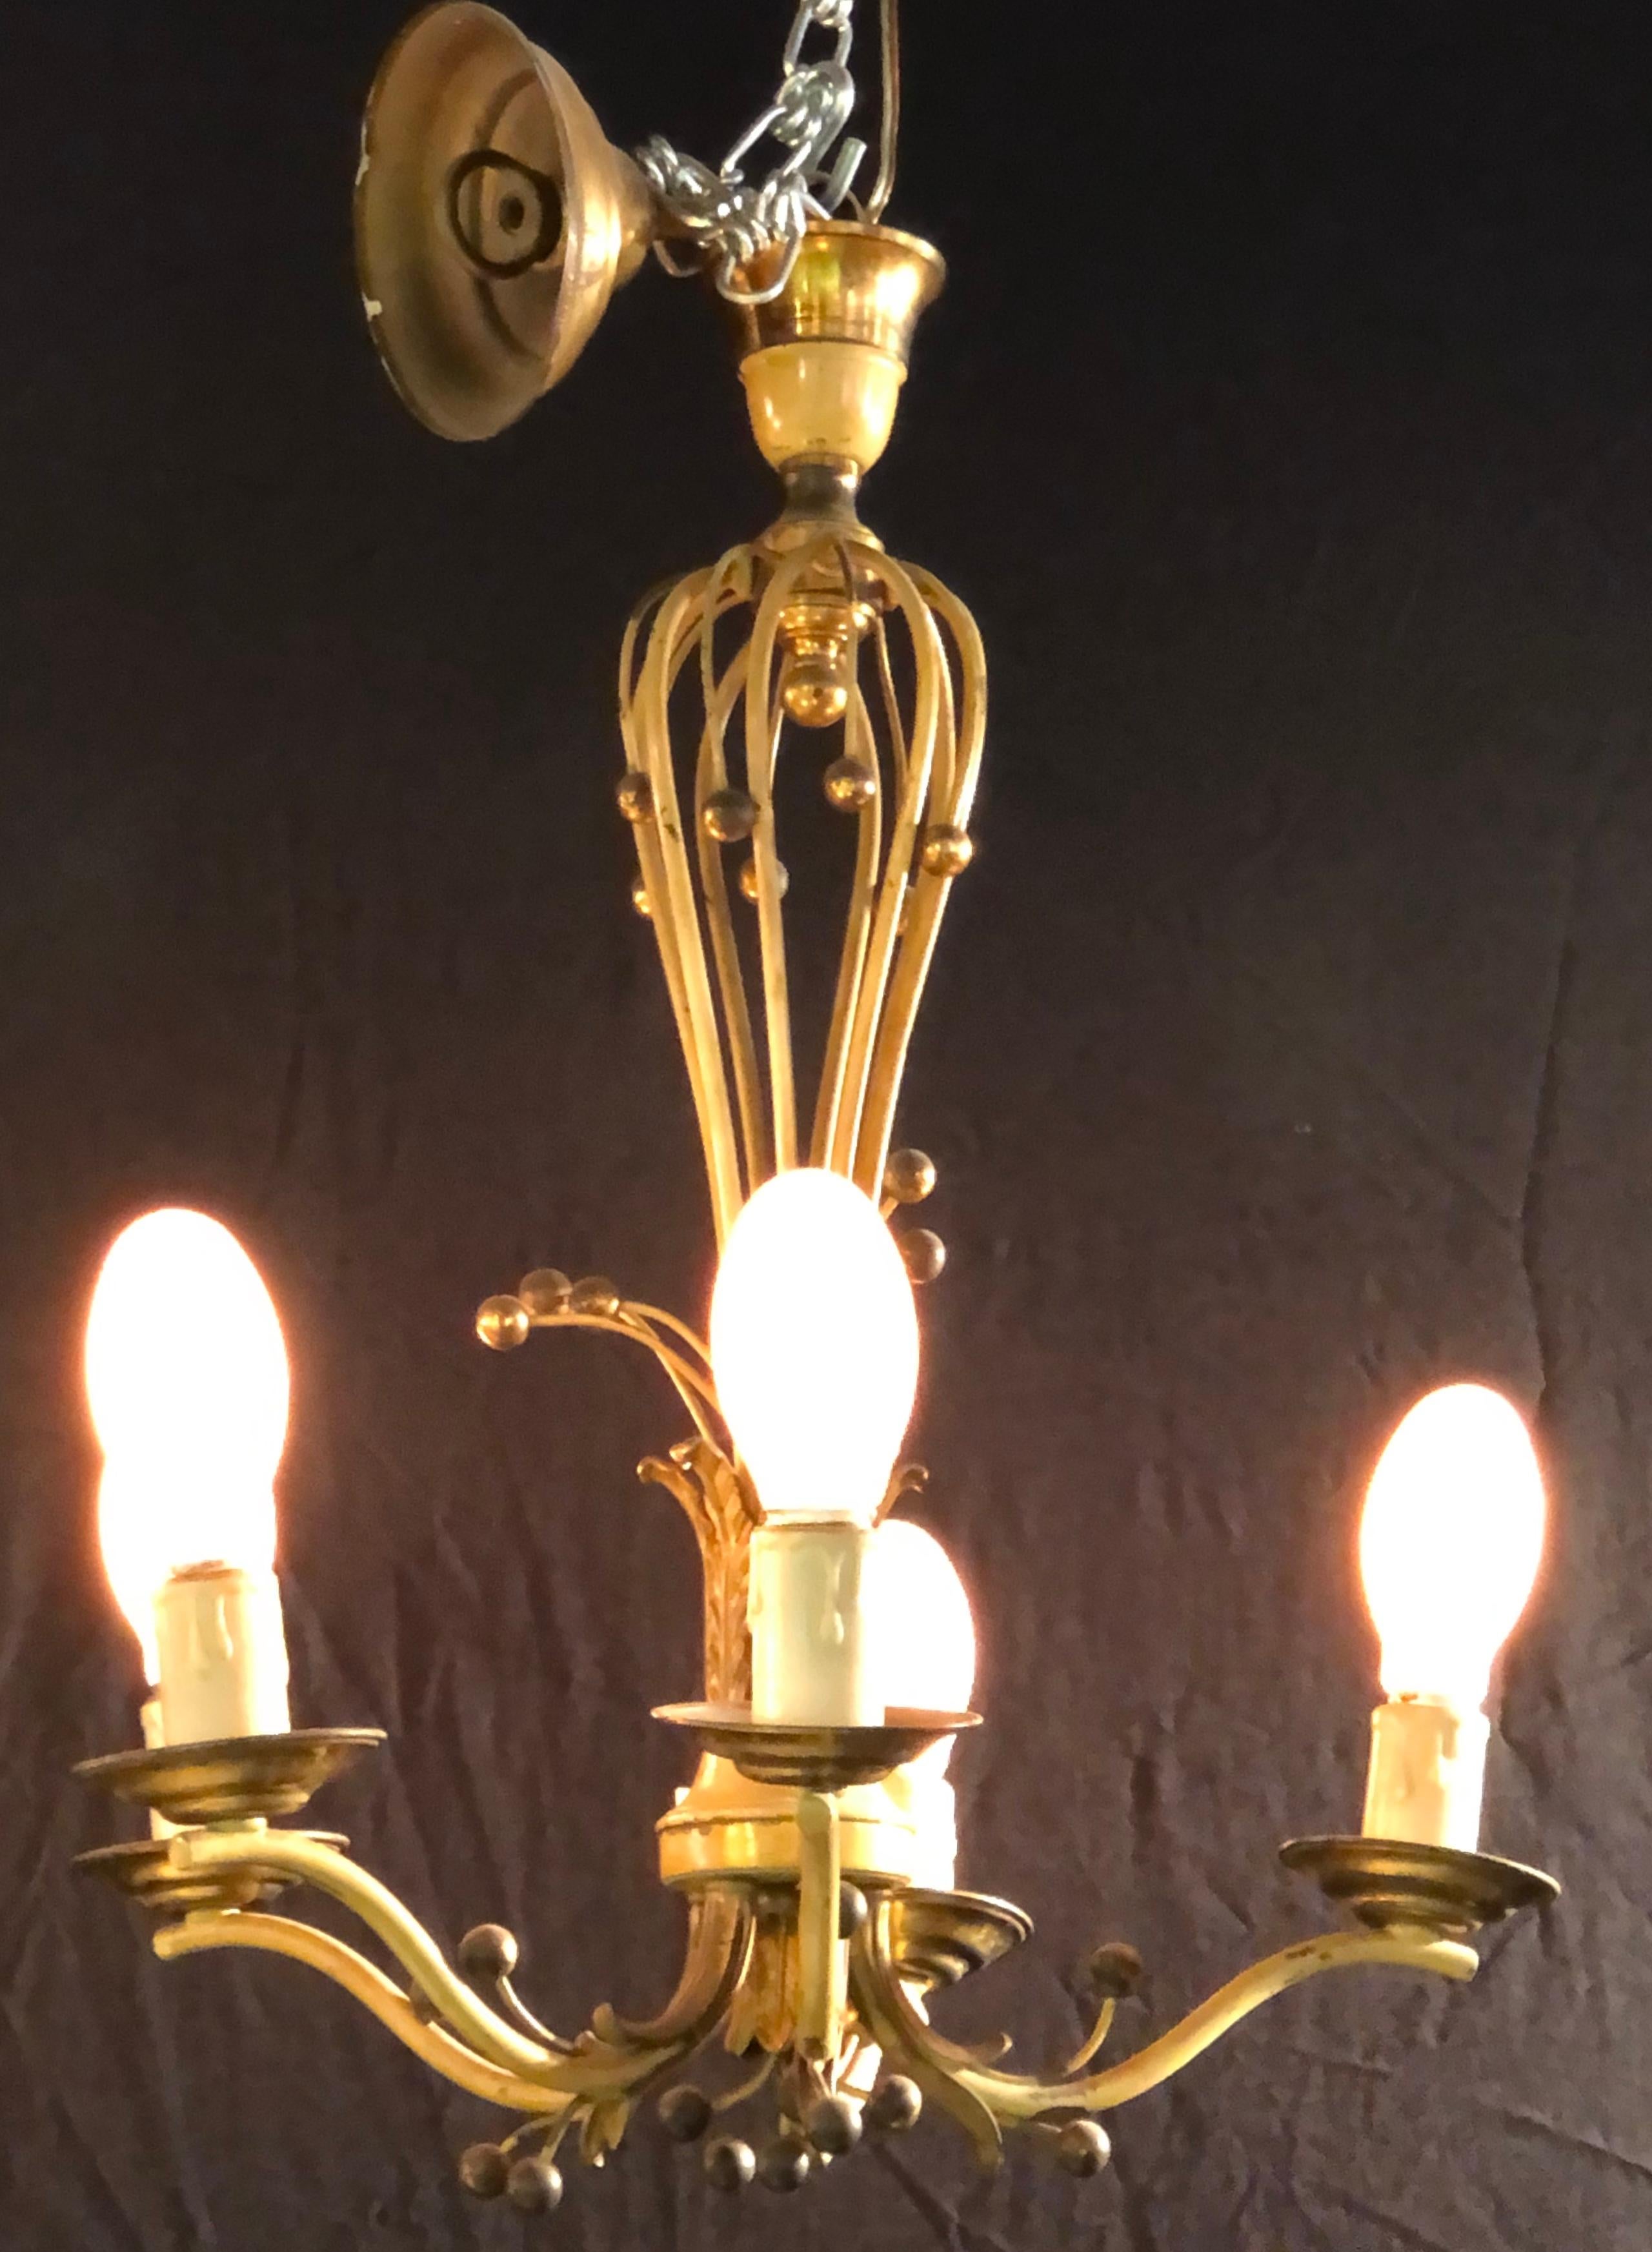 Hand-Painted Hollywood Regency Balloon Shaped Chandelier, Metal Paint Decorated with 5 Arms For Sale